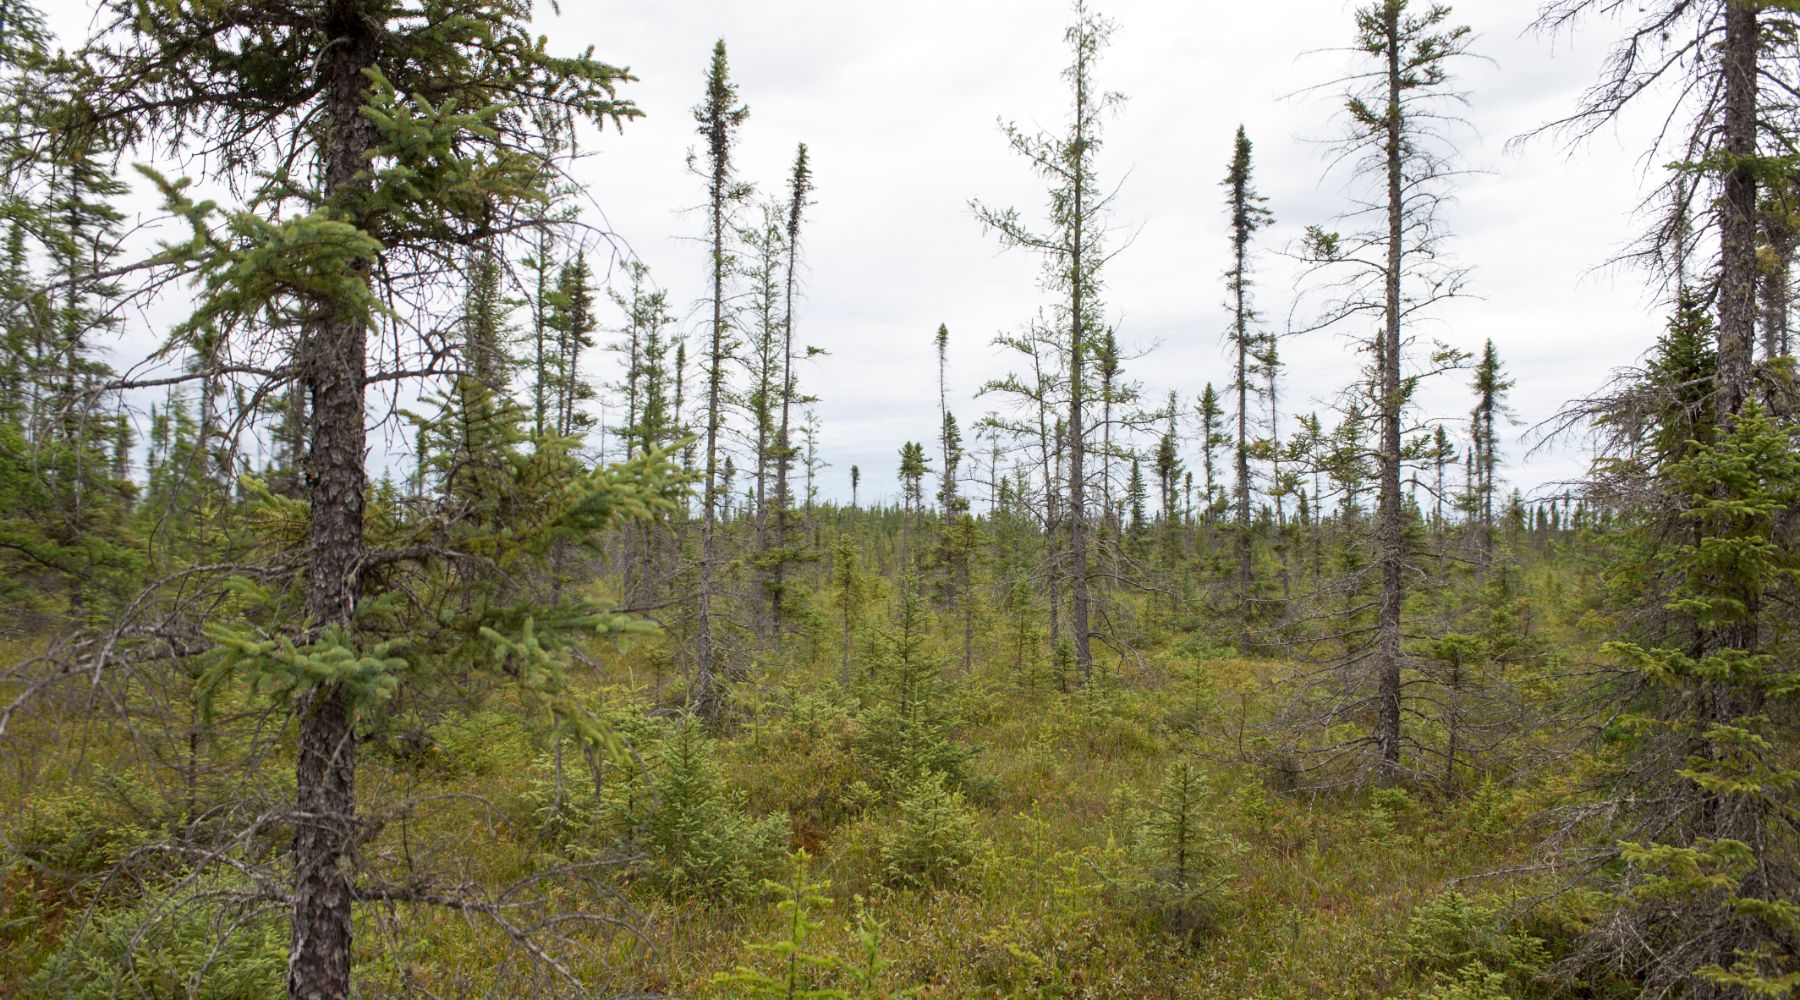 Spruce trees affected by spruce beetles